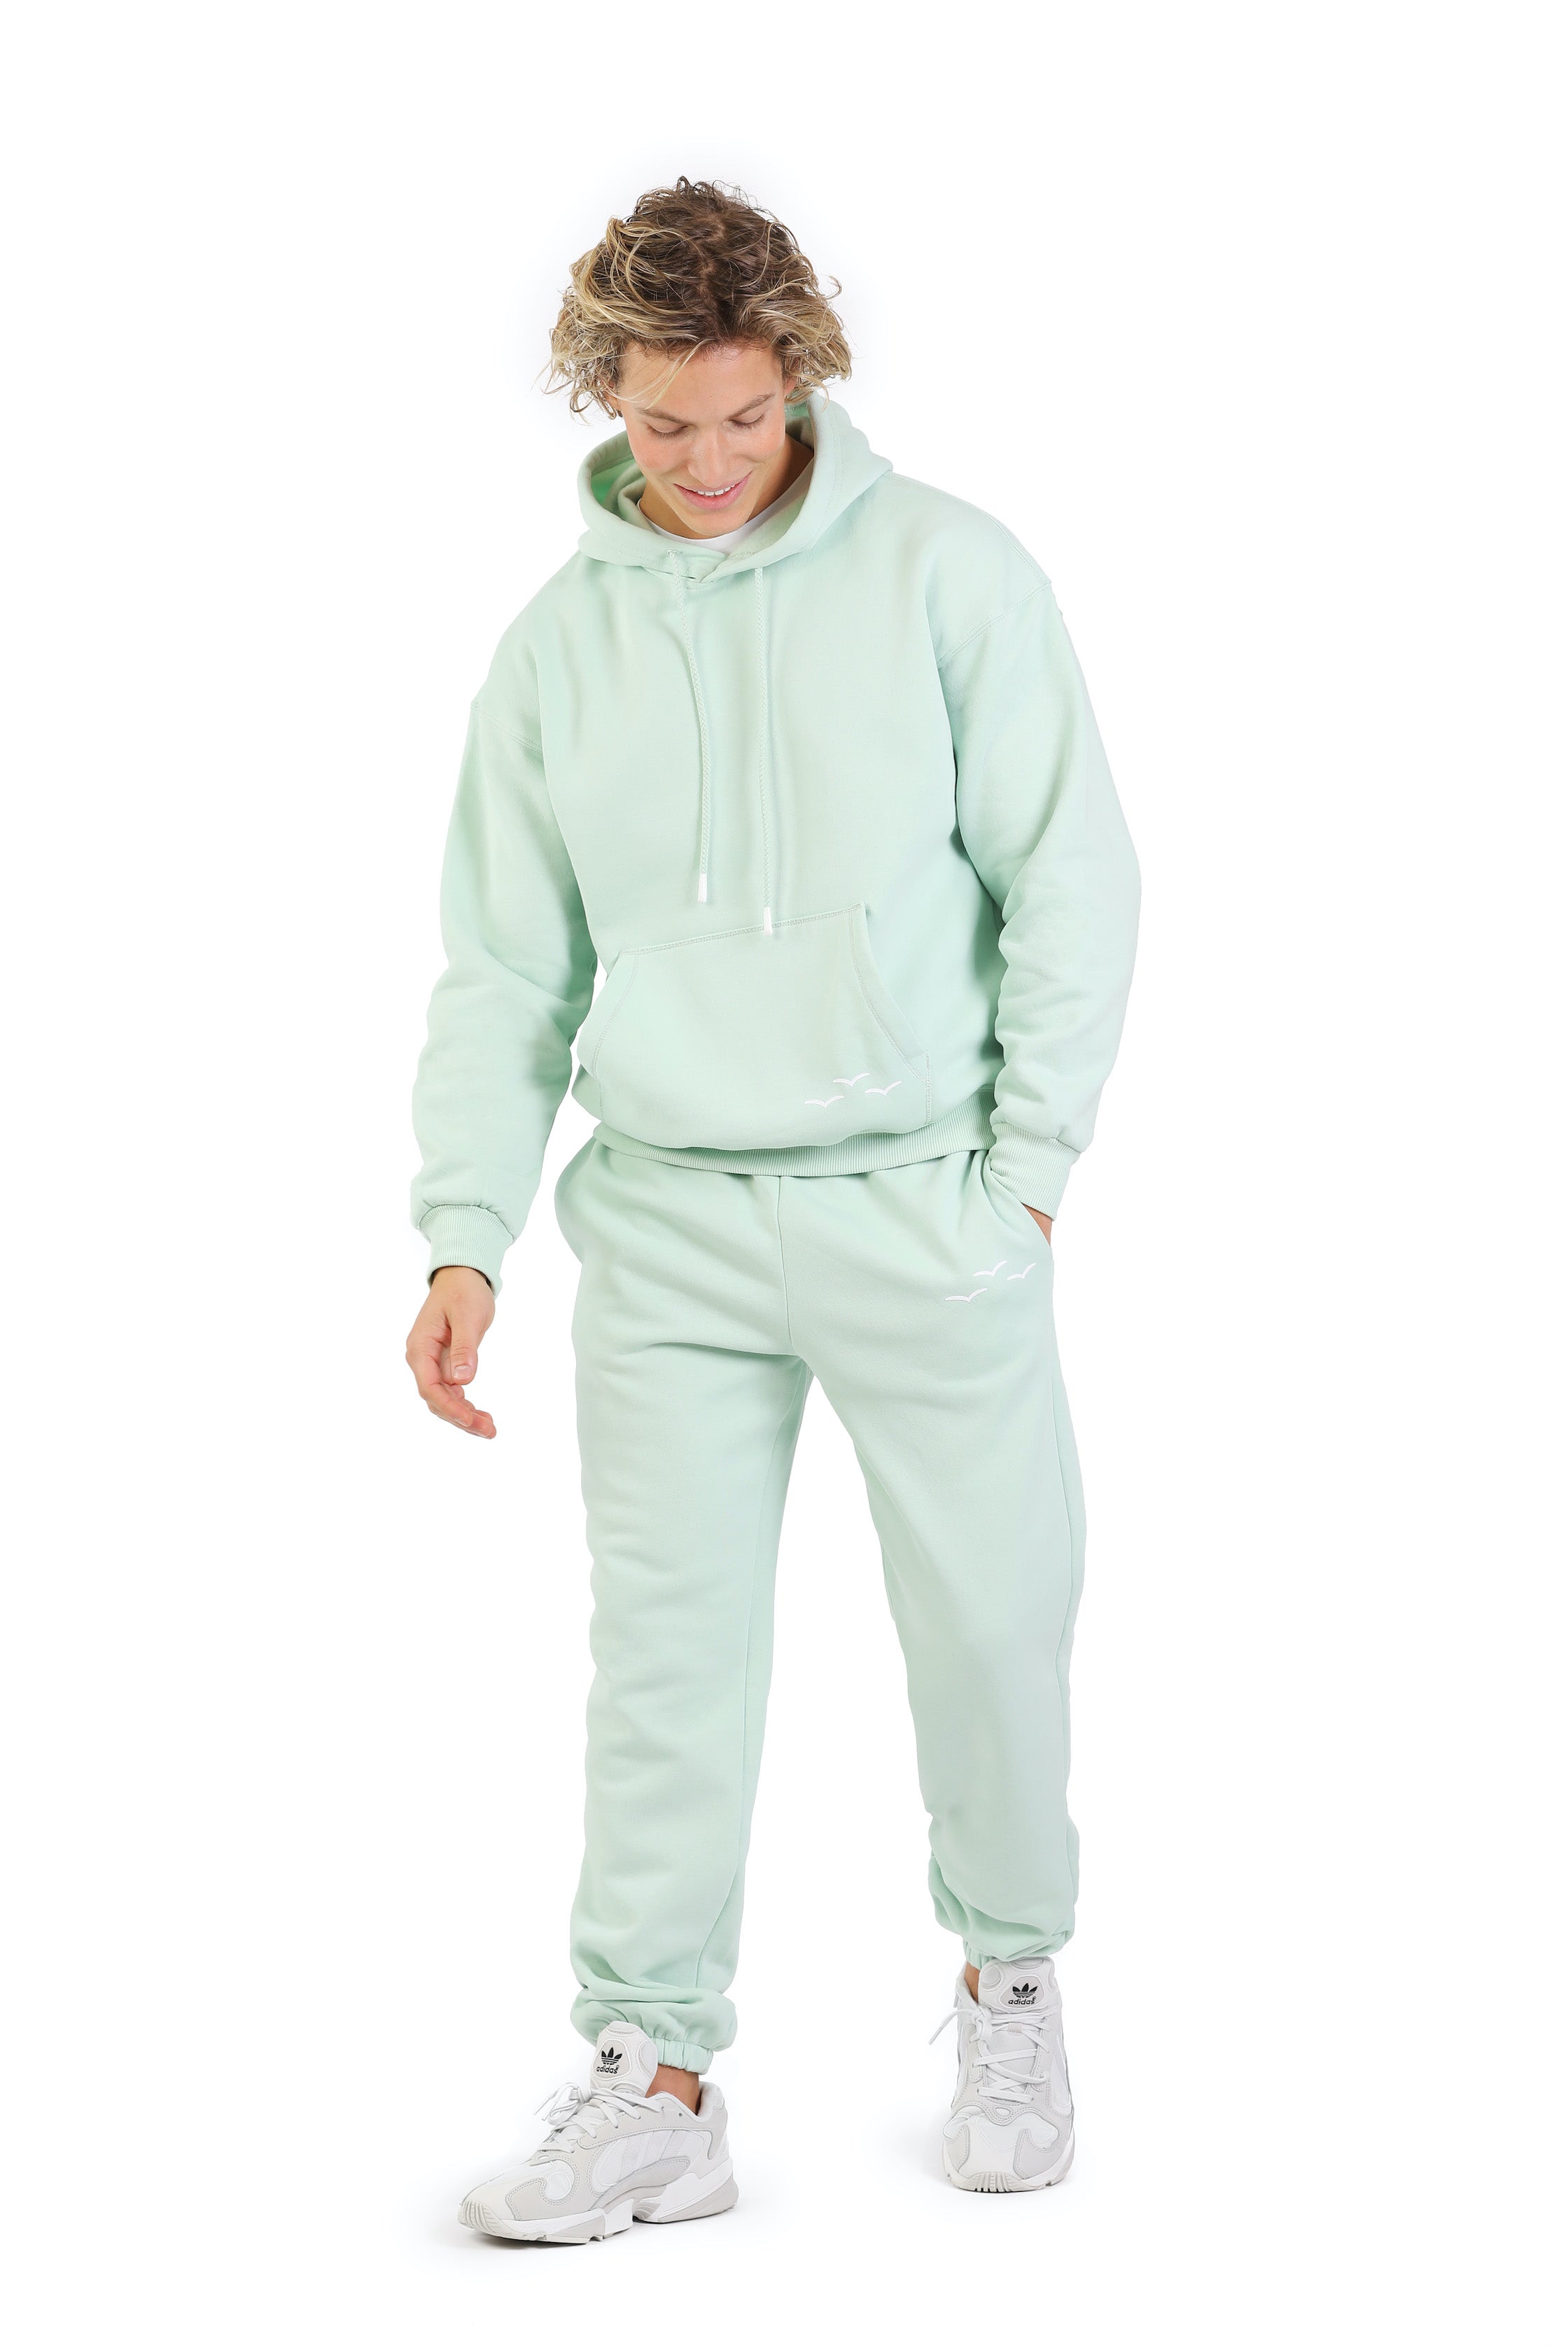 Men's sweatsuit set in Mint from Lazypants - always a great buy at a reasonable price.